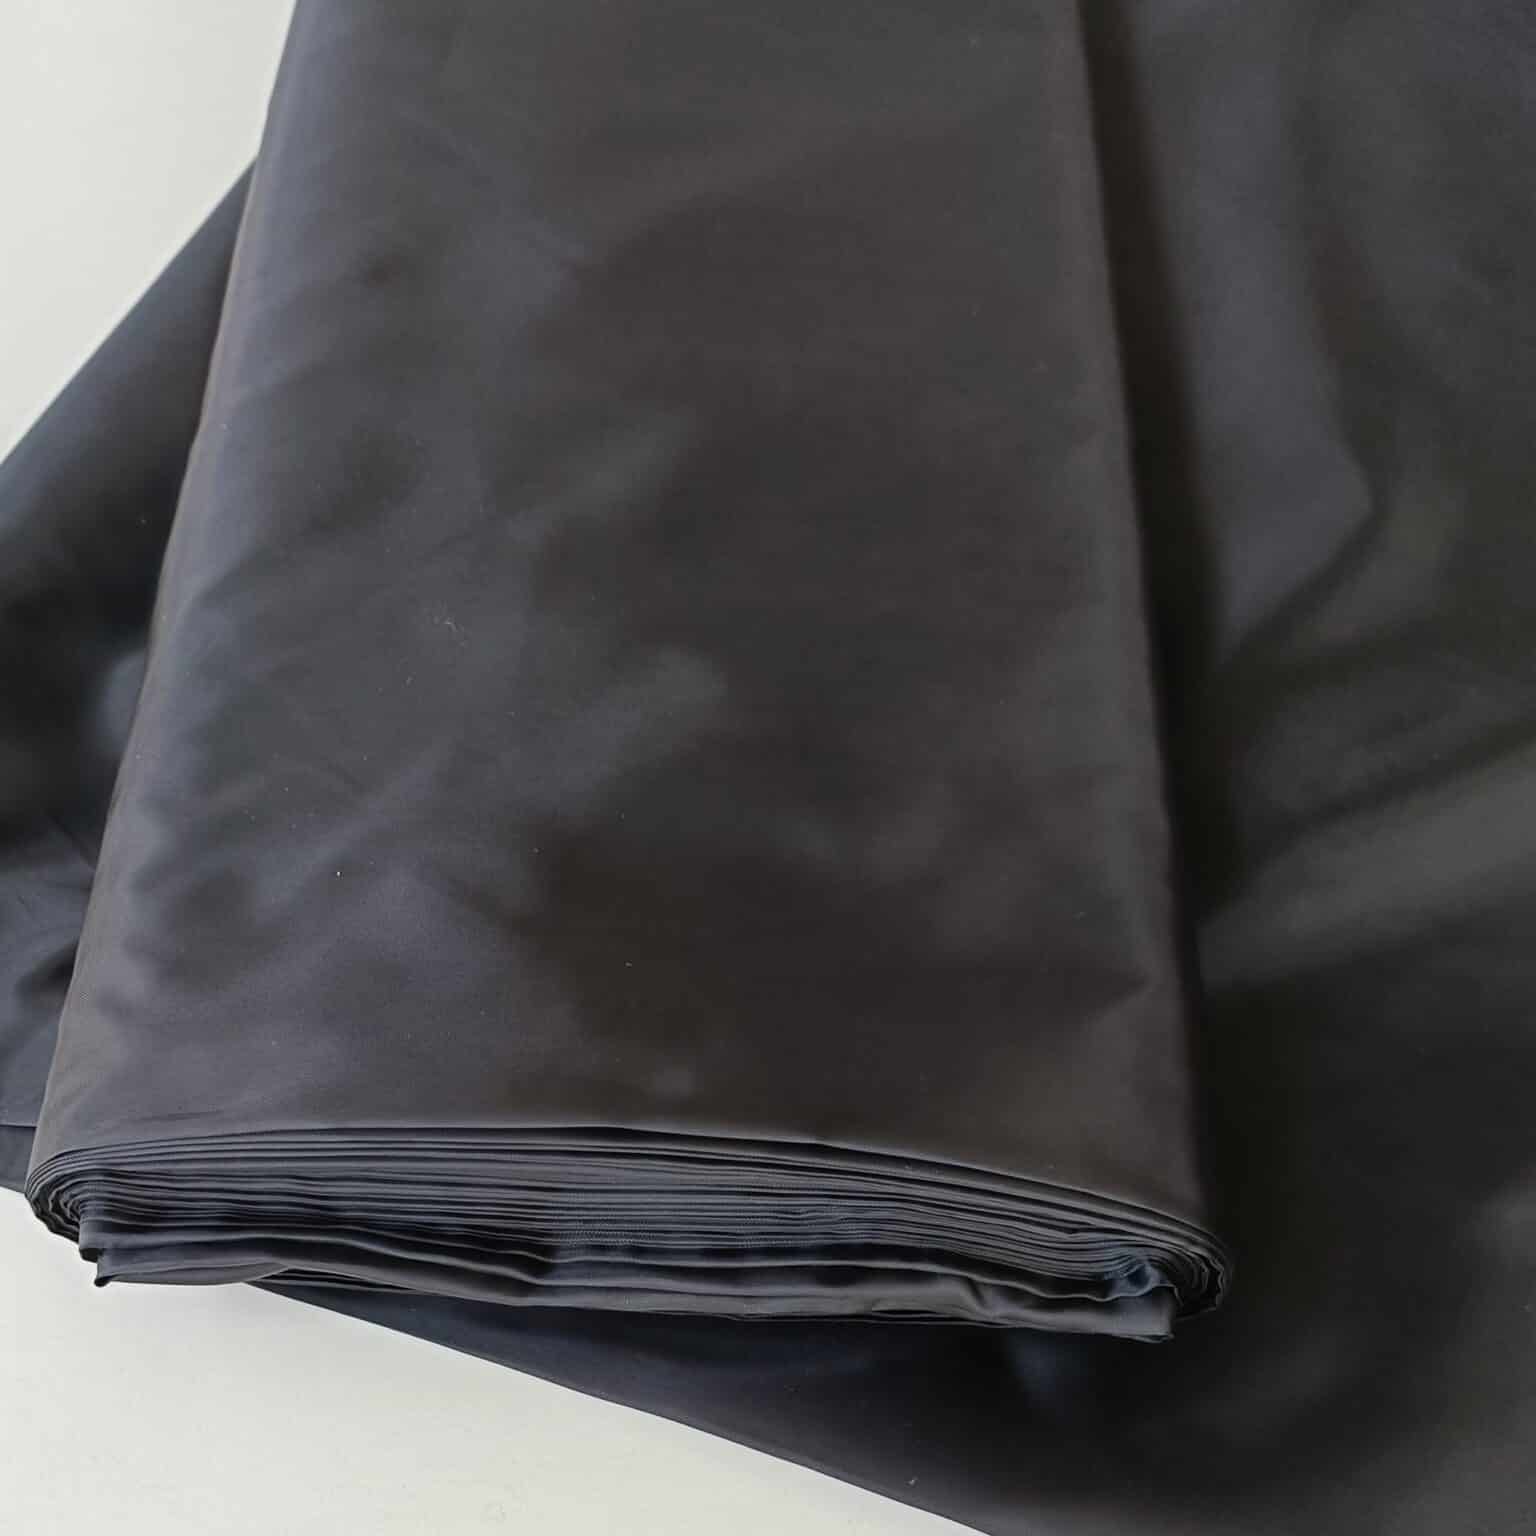 Polyester Lining Fabric - Black - Anti Static - 150cm Wide